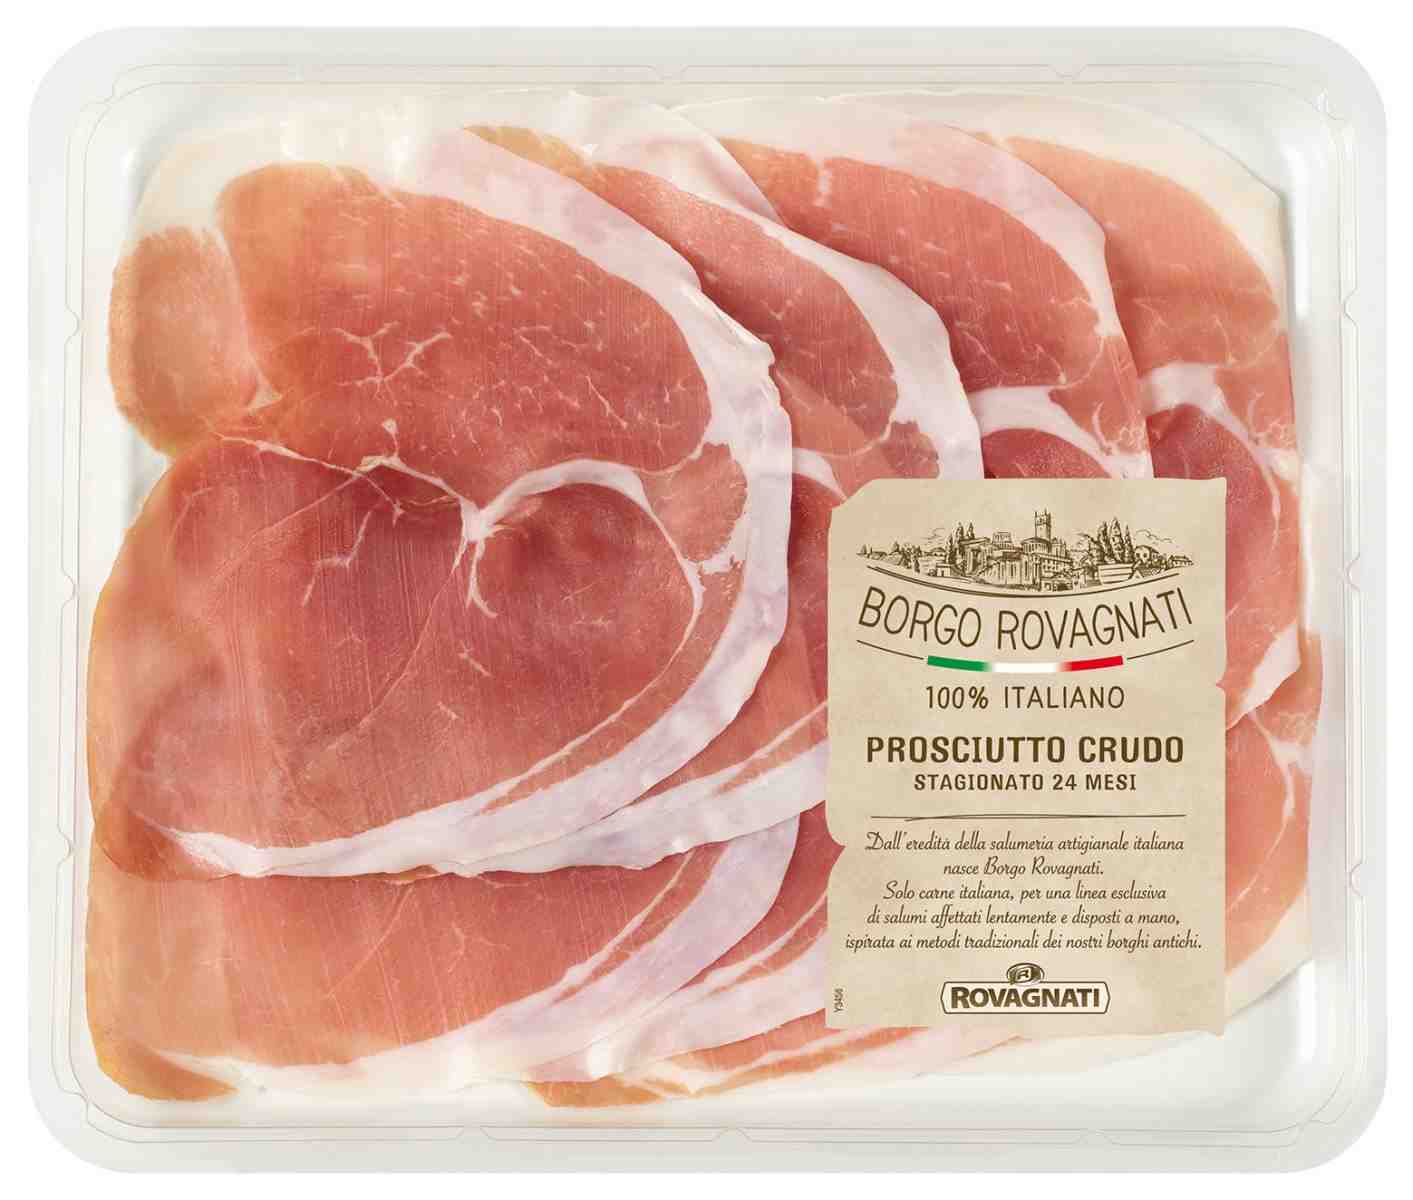 What does it mean if ham is cured?